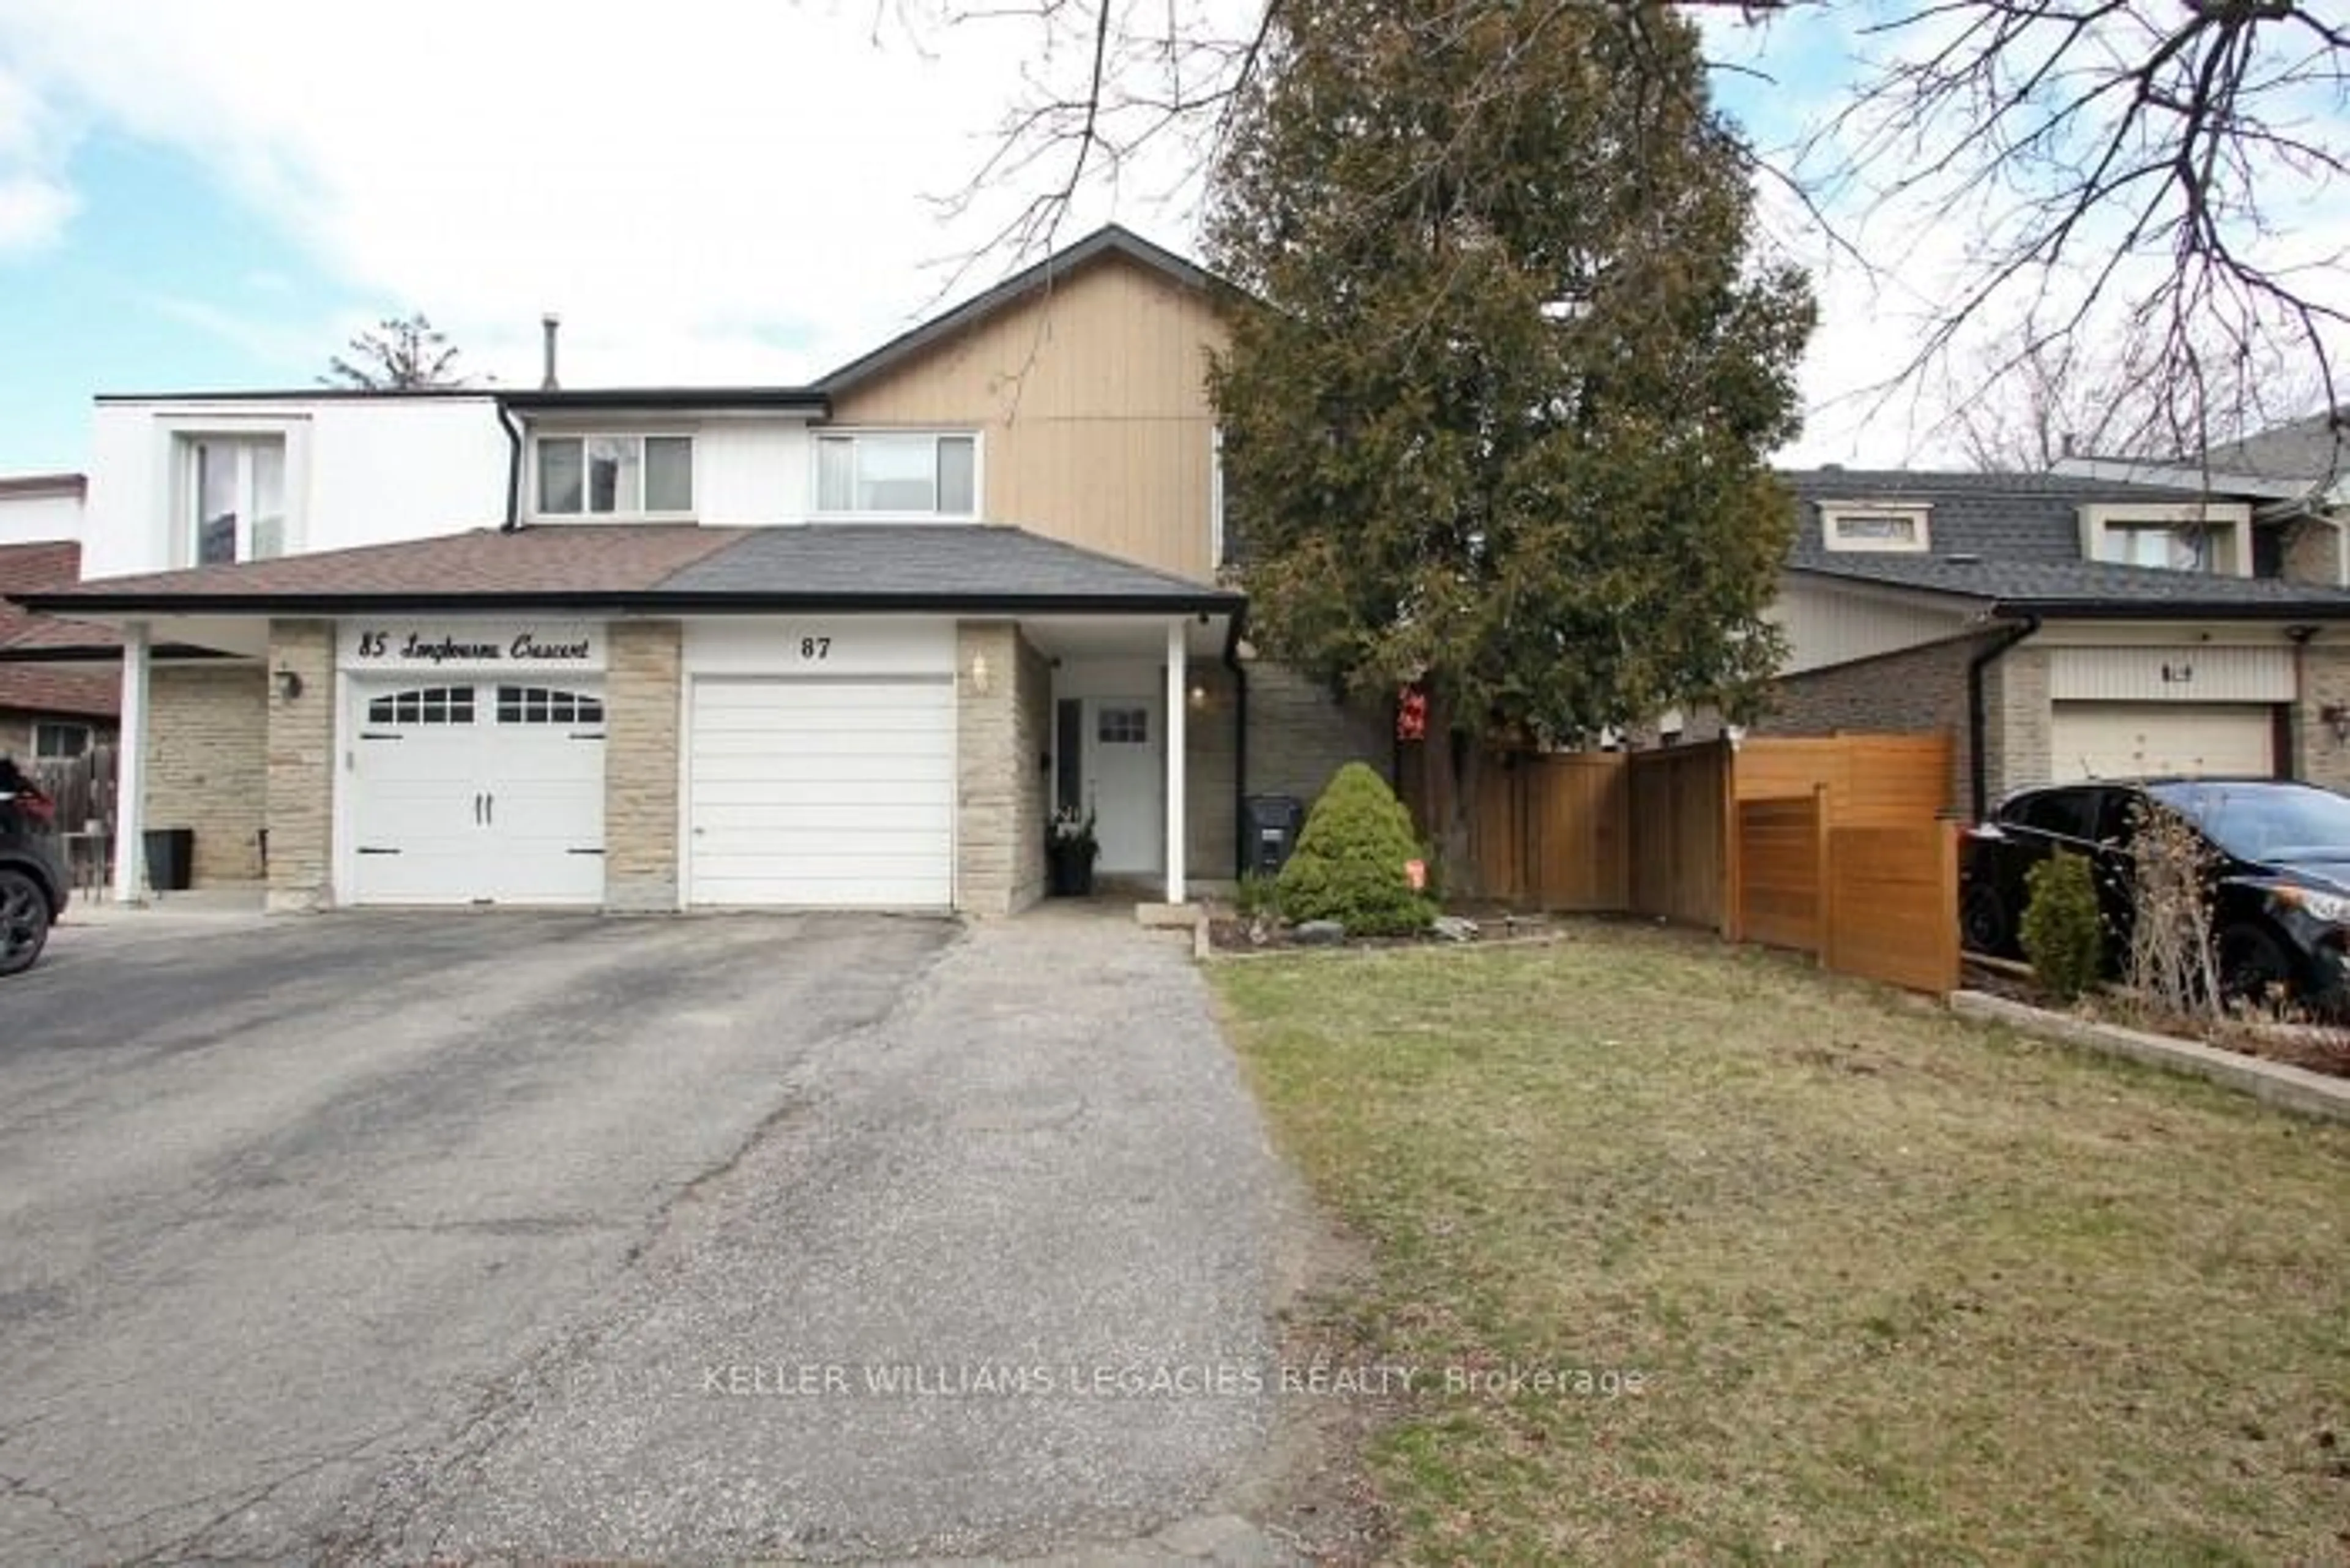 Frontside or backside of a home for 87 Longbourne Cres, Brampton Ontario L6S 2R8